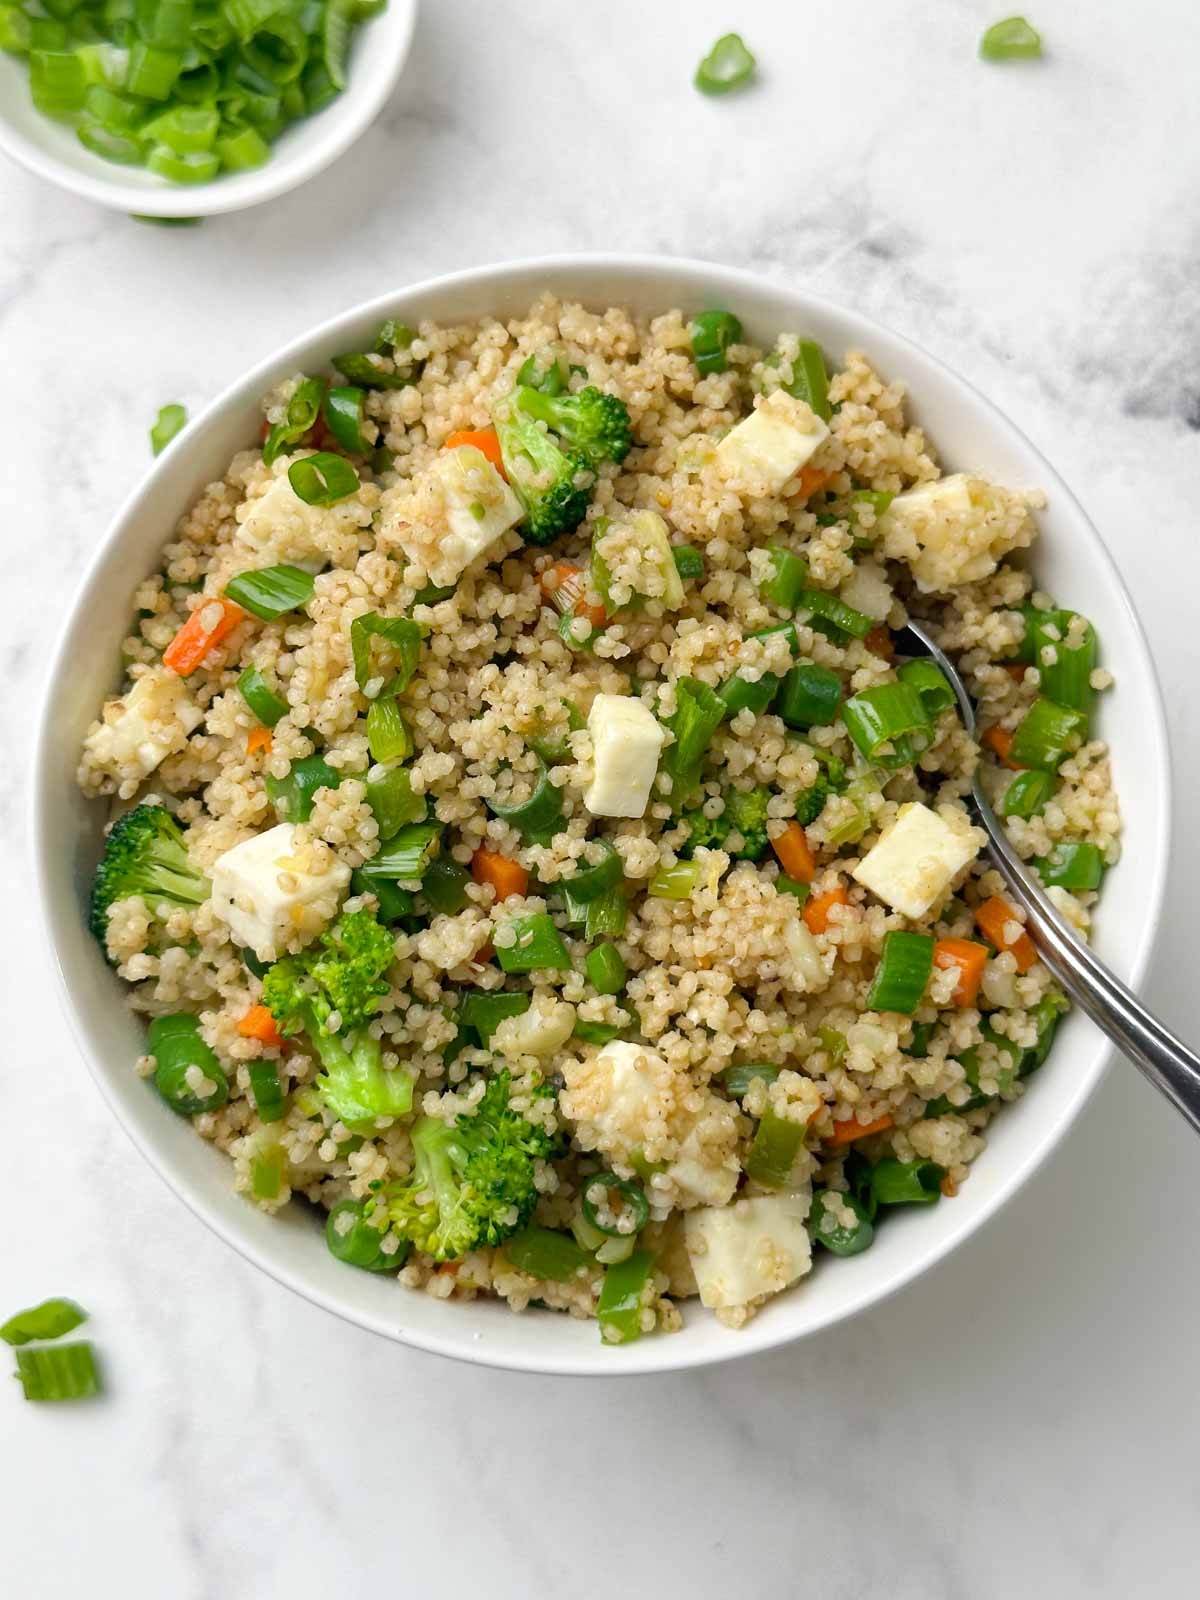 foxtail millet fried rice served in a bowl with a spoon and green onions on the side